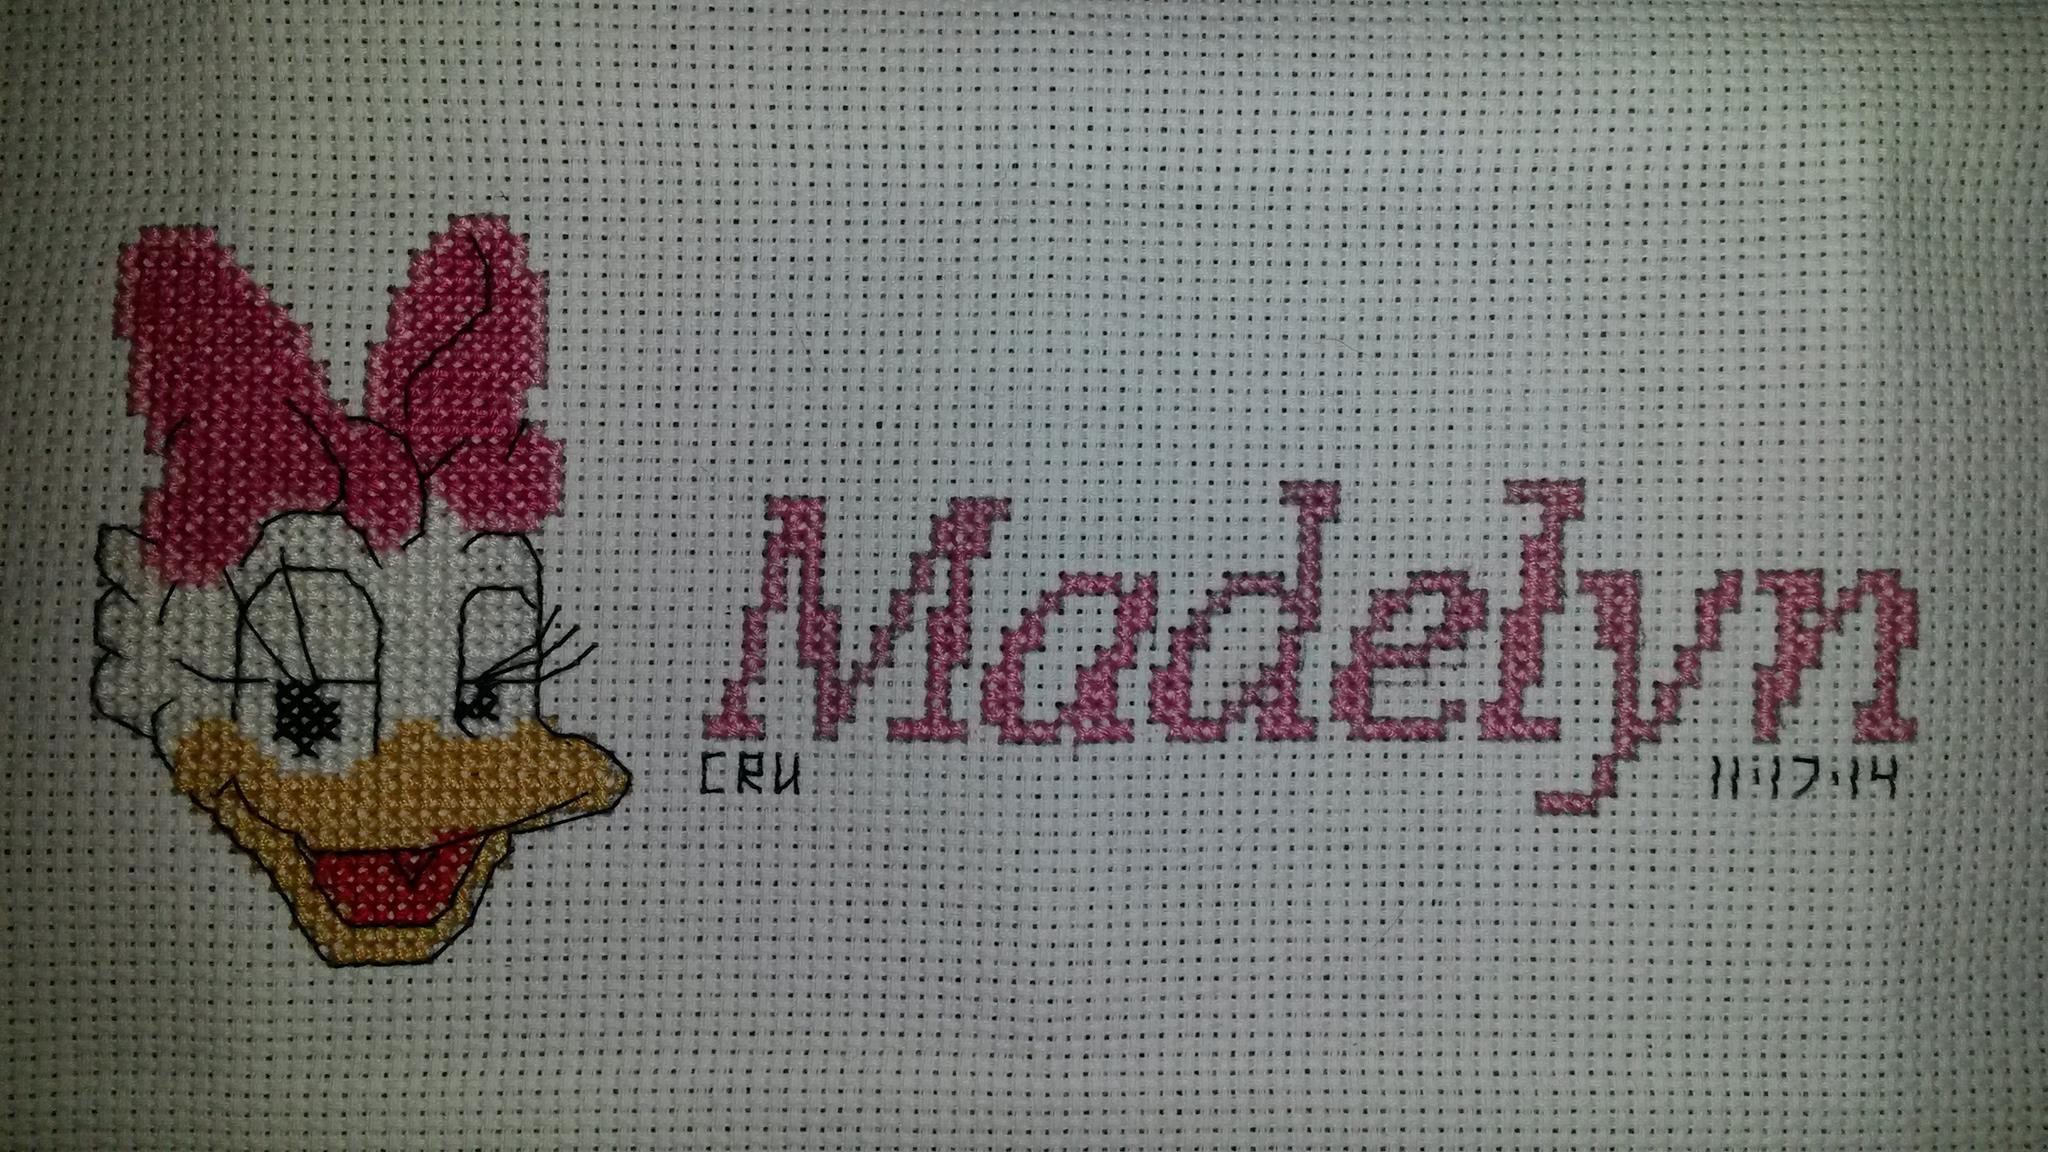 Cross stitch name Madelyn with Disney Daisy Duck author facebook user Carrie Renae Uetz